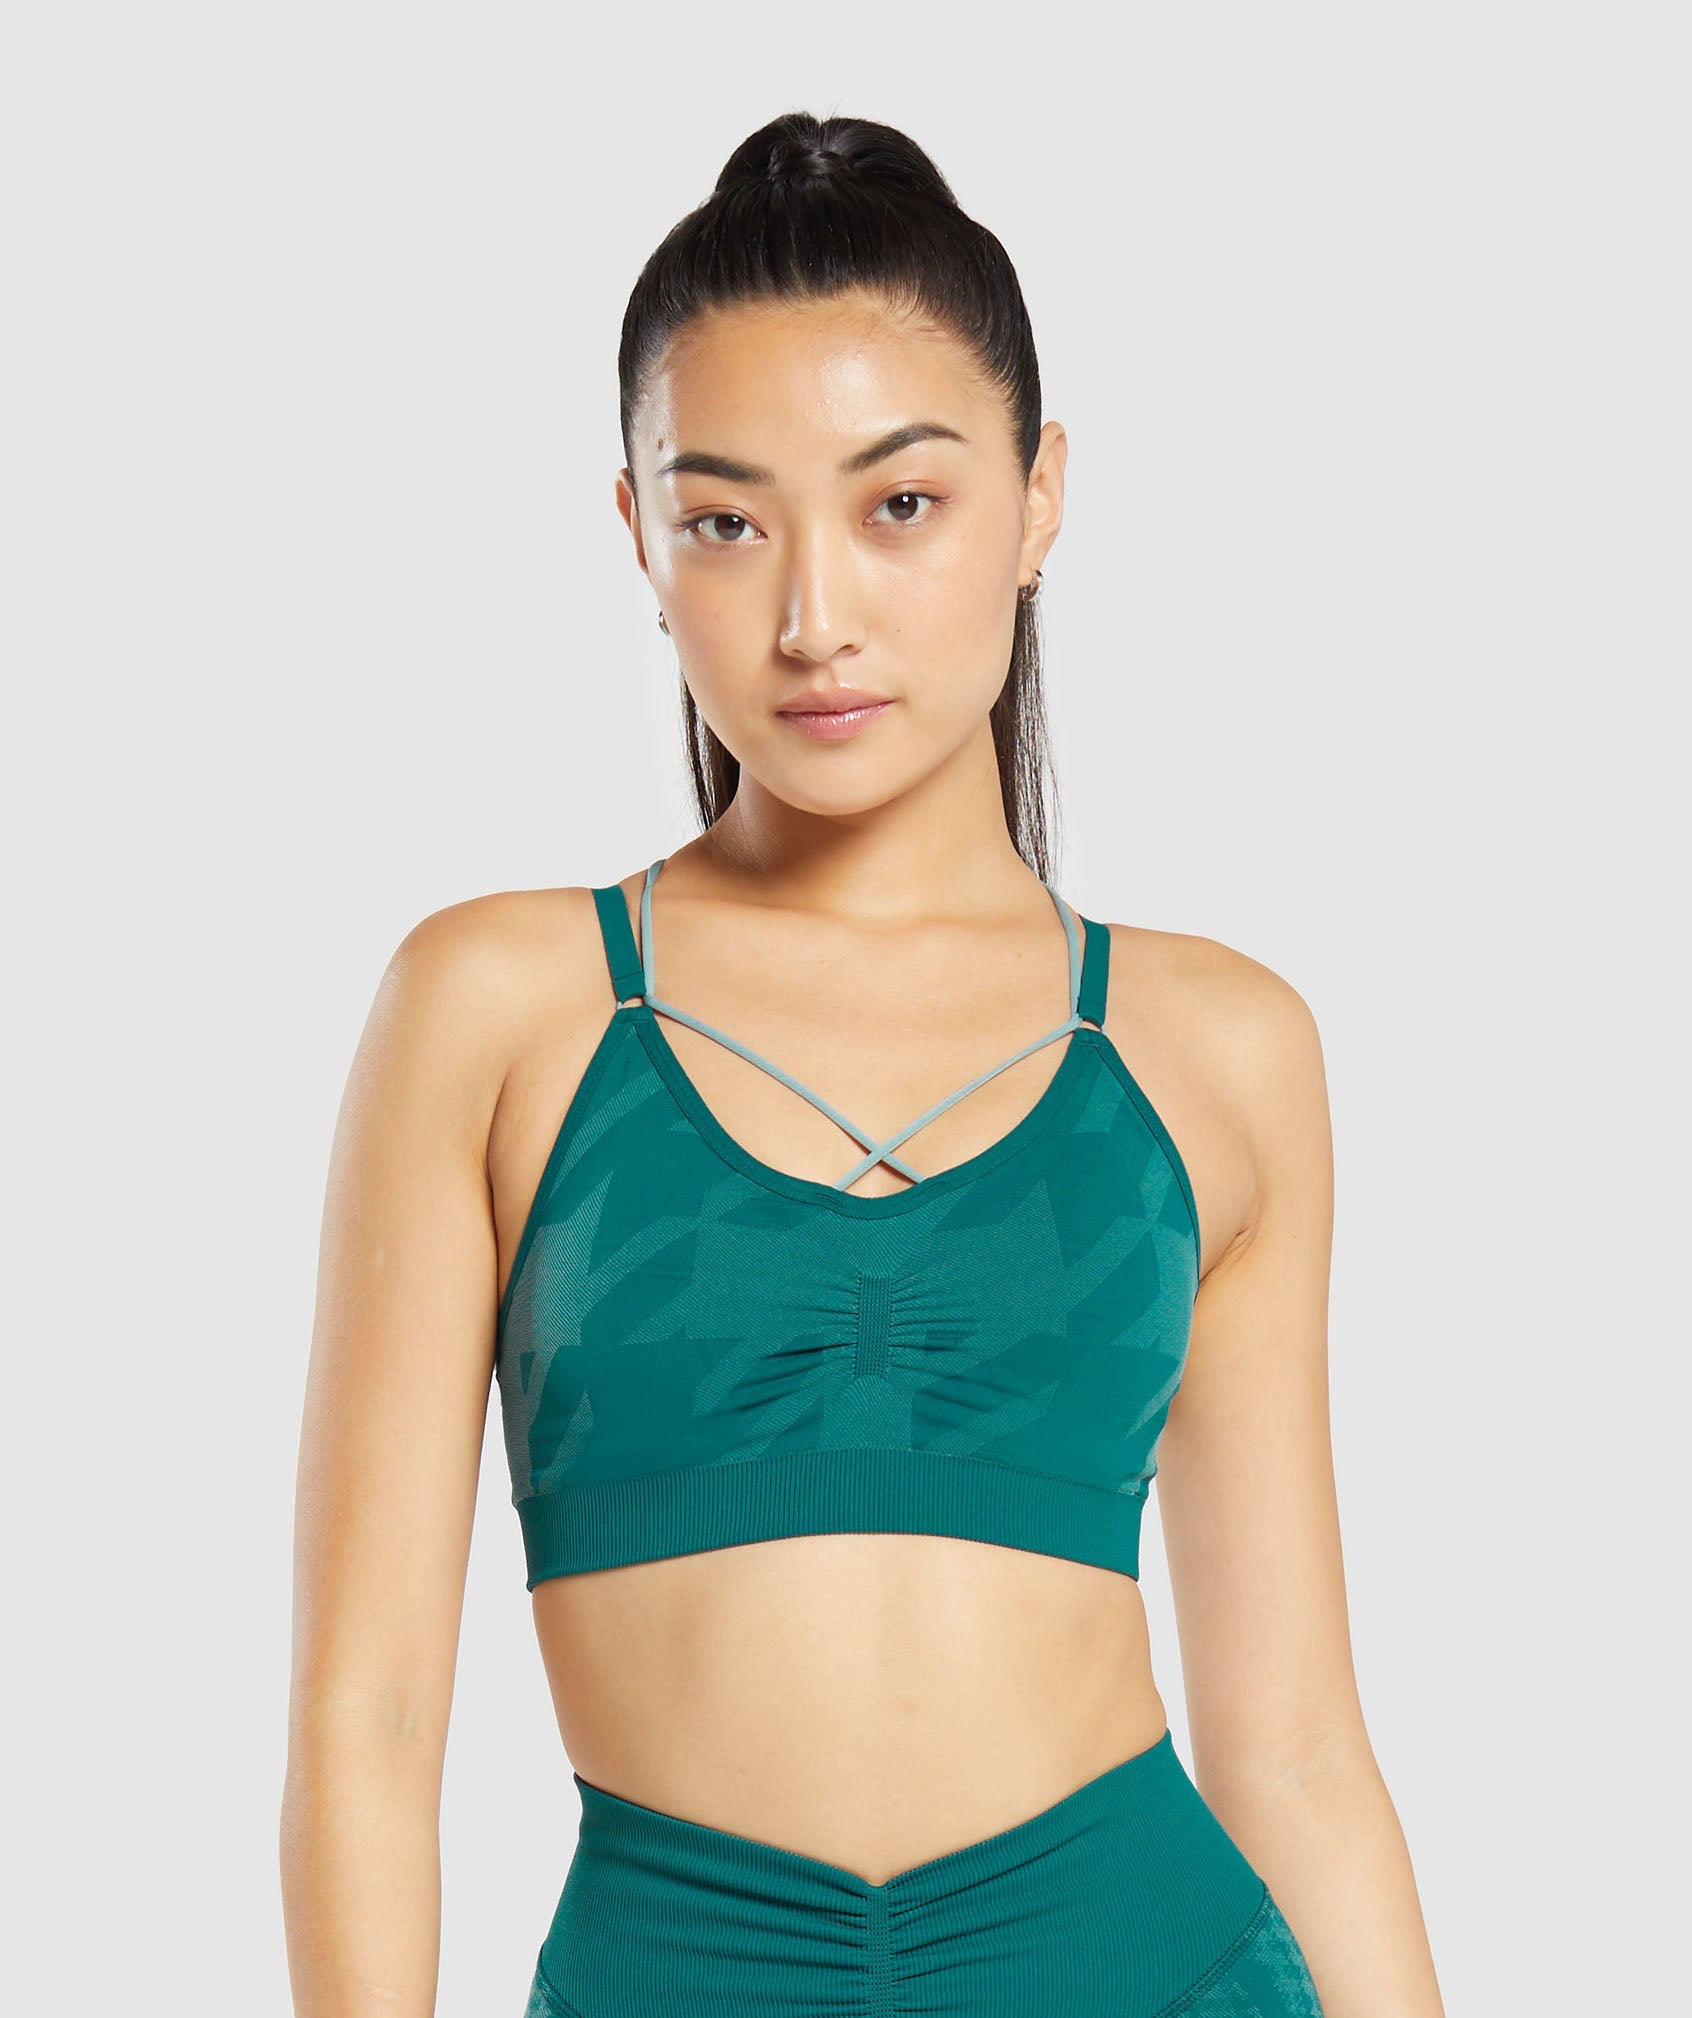 Are you seatching for the besh sports bra after a double